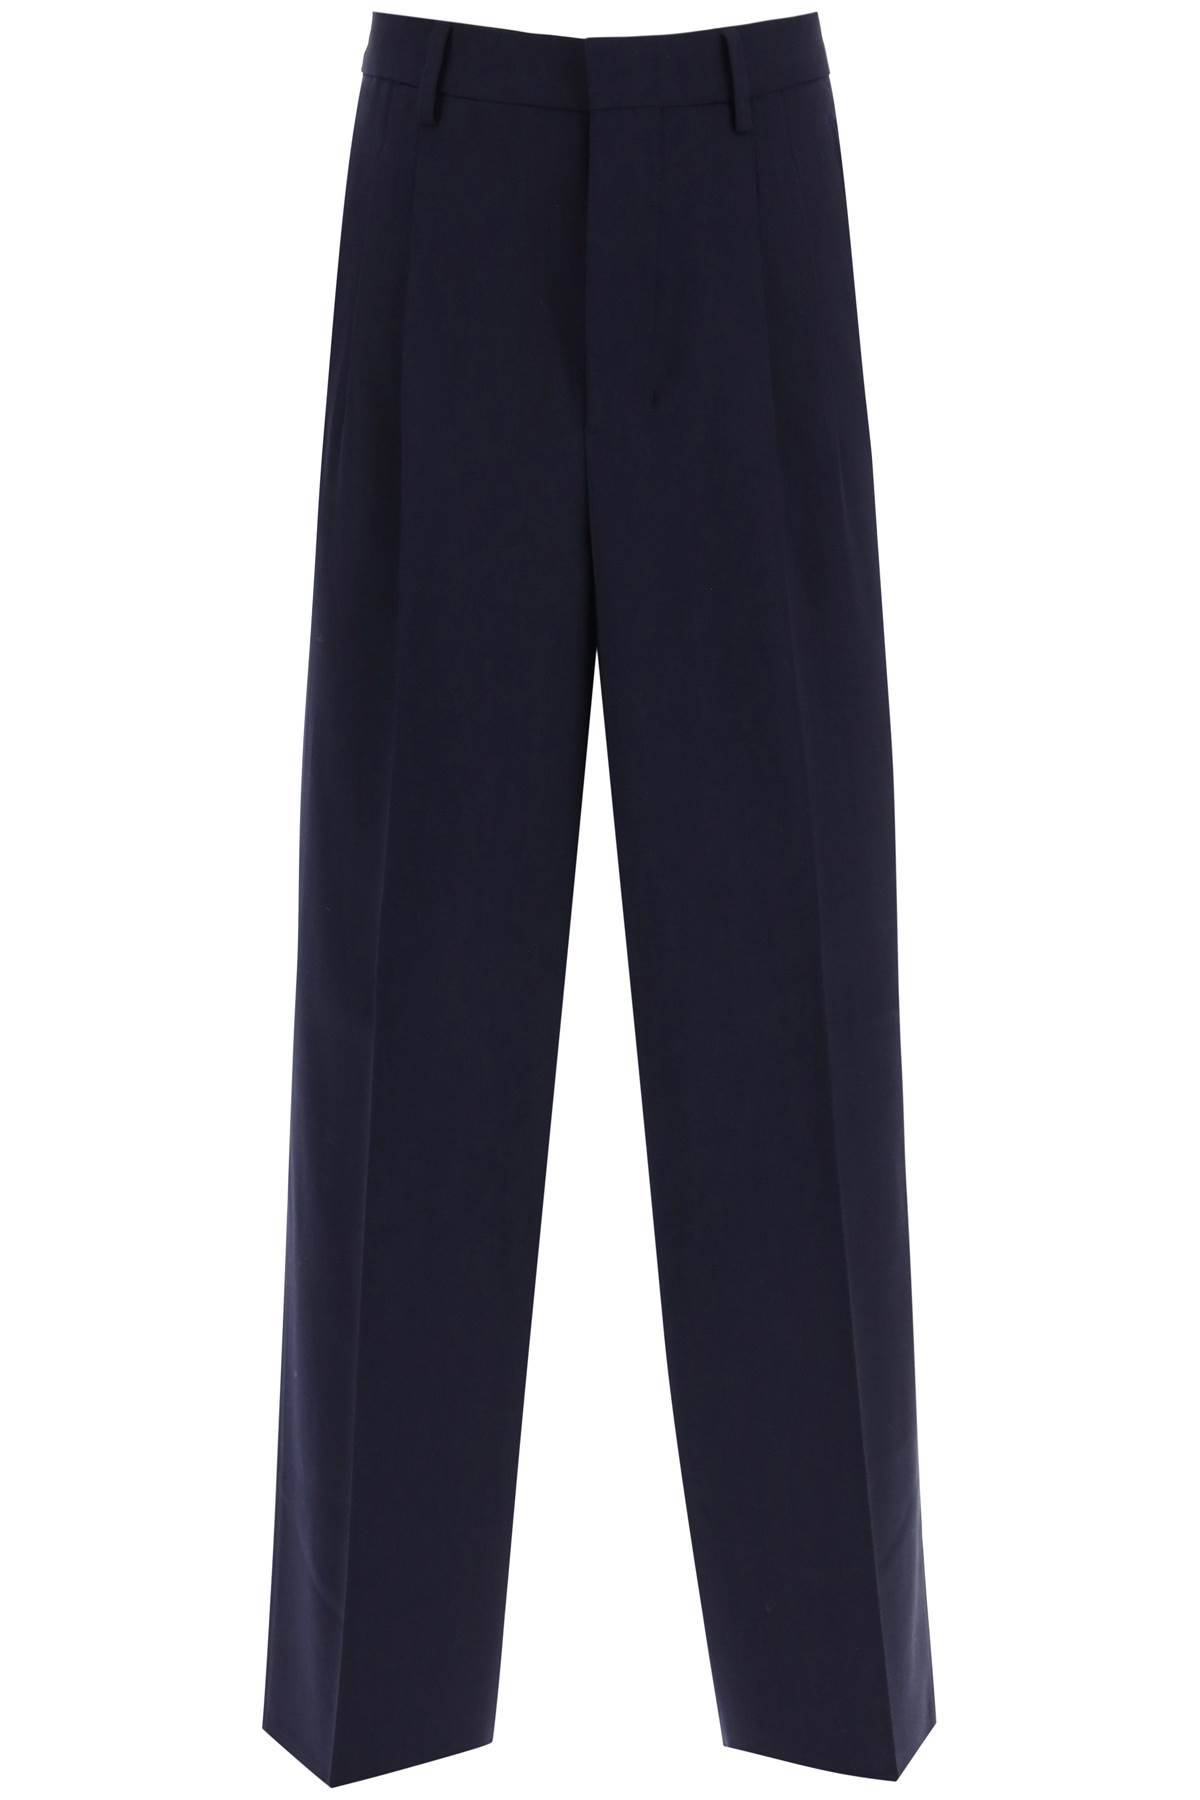 Shop Ami Alexandre Mattiussi Loose Fit Pants With Straight Cut In Blue